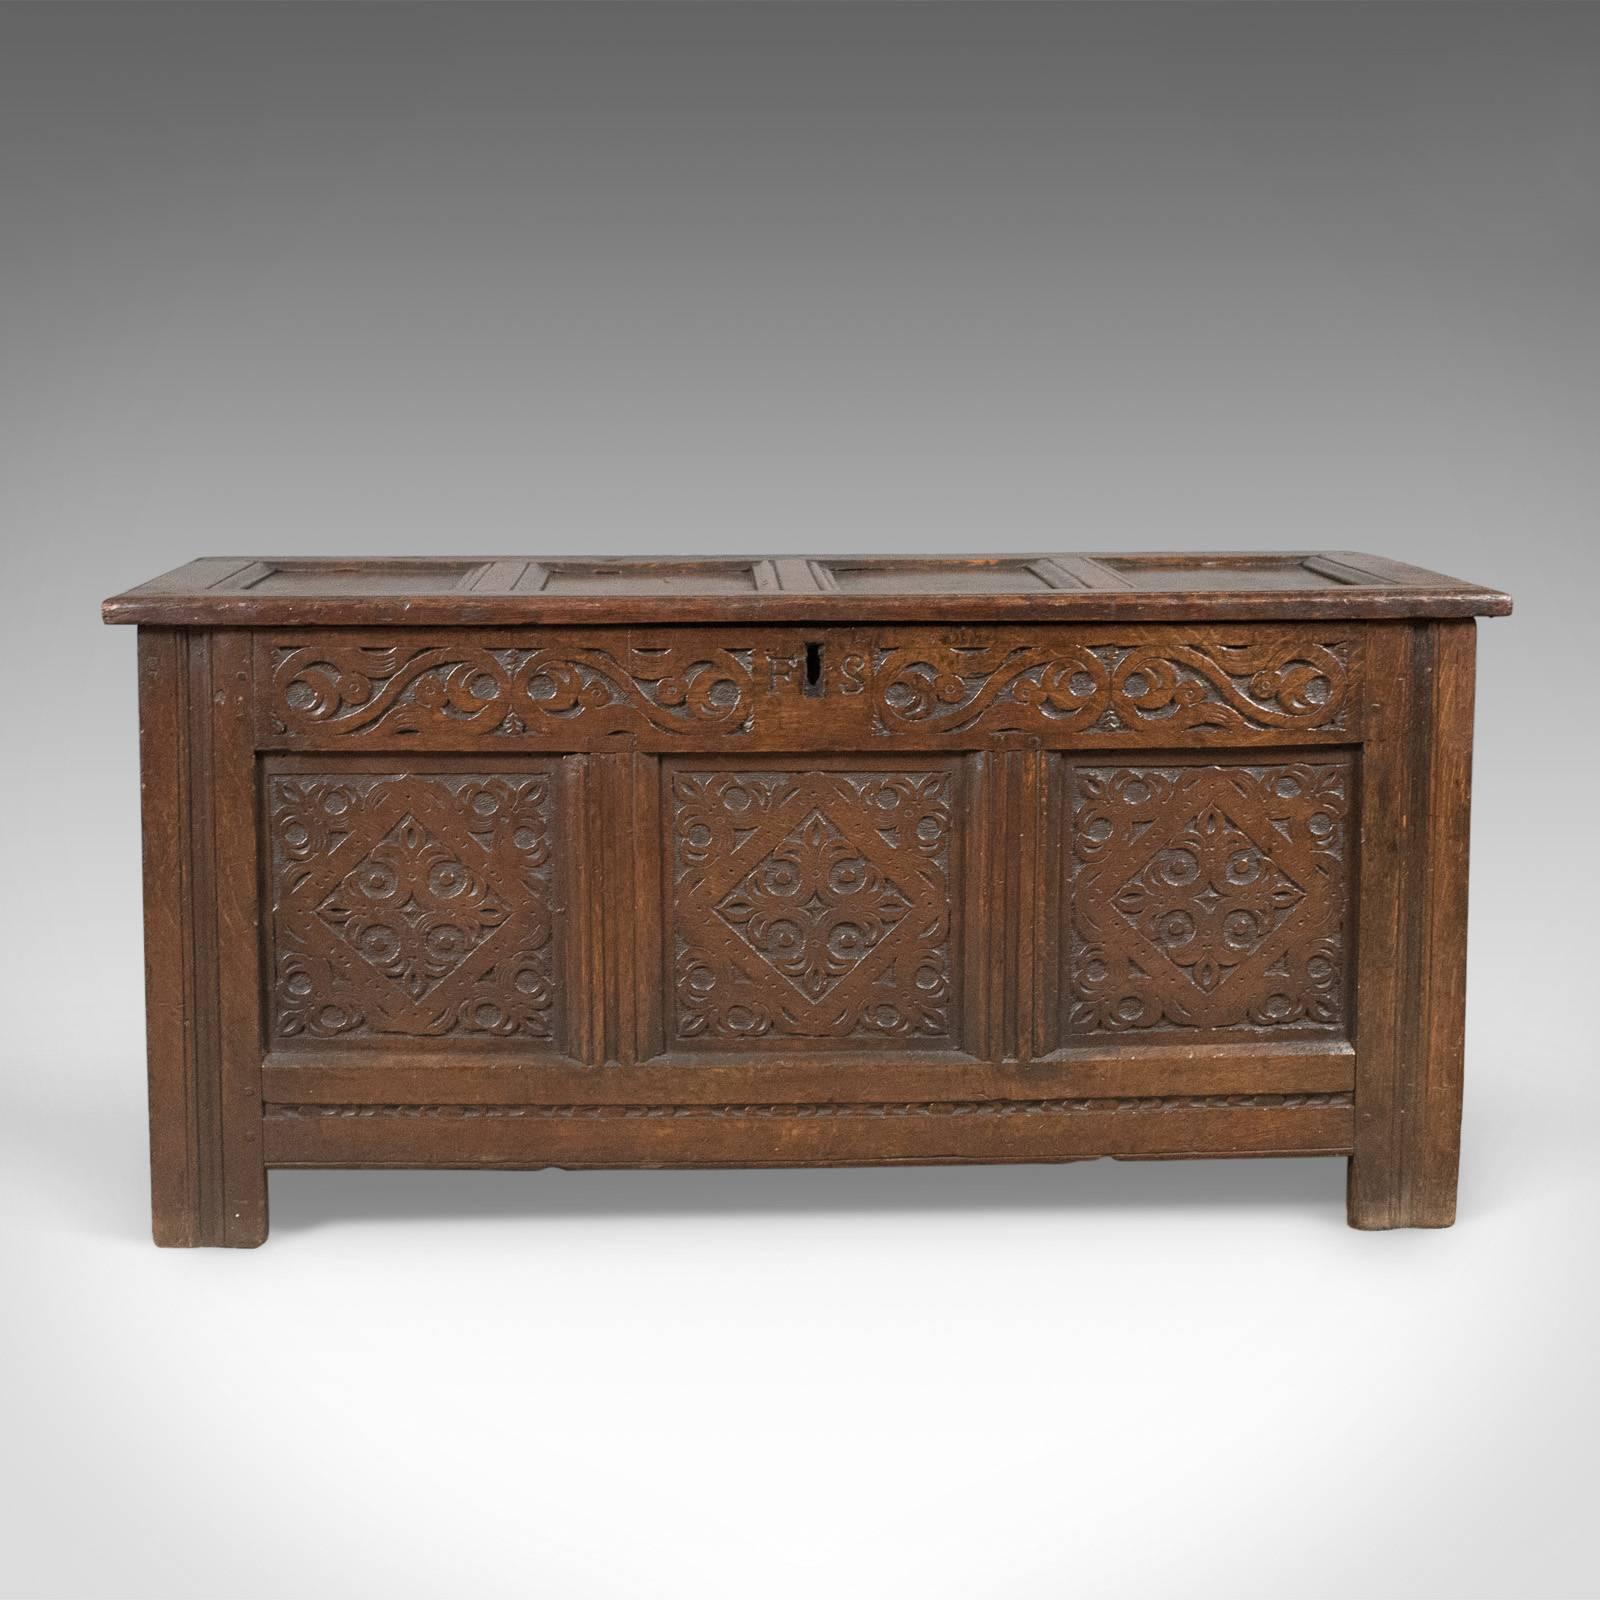 This is a carved antique coffer, an English oak joined chest dating to circa 1700.

Glorious color and desirable aged patina
Vigorously carved decoration to the front panels
Guilloché foliate frieze to carved central initials 'F S'
Over three